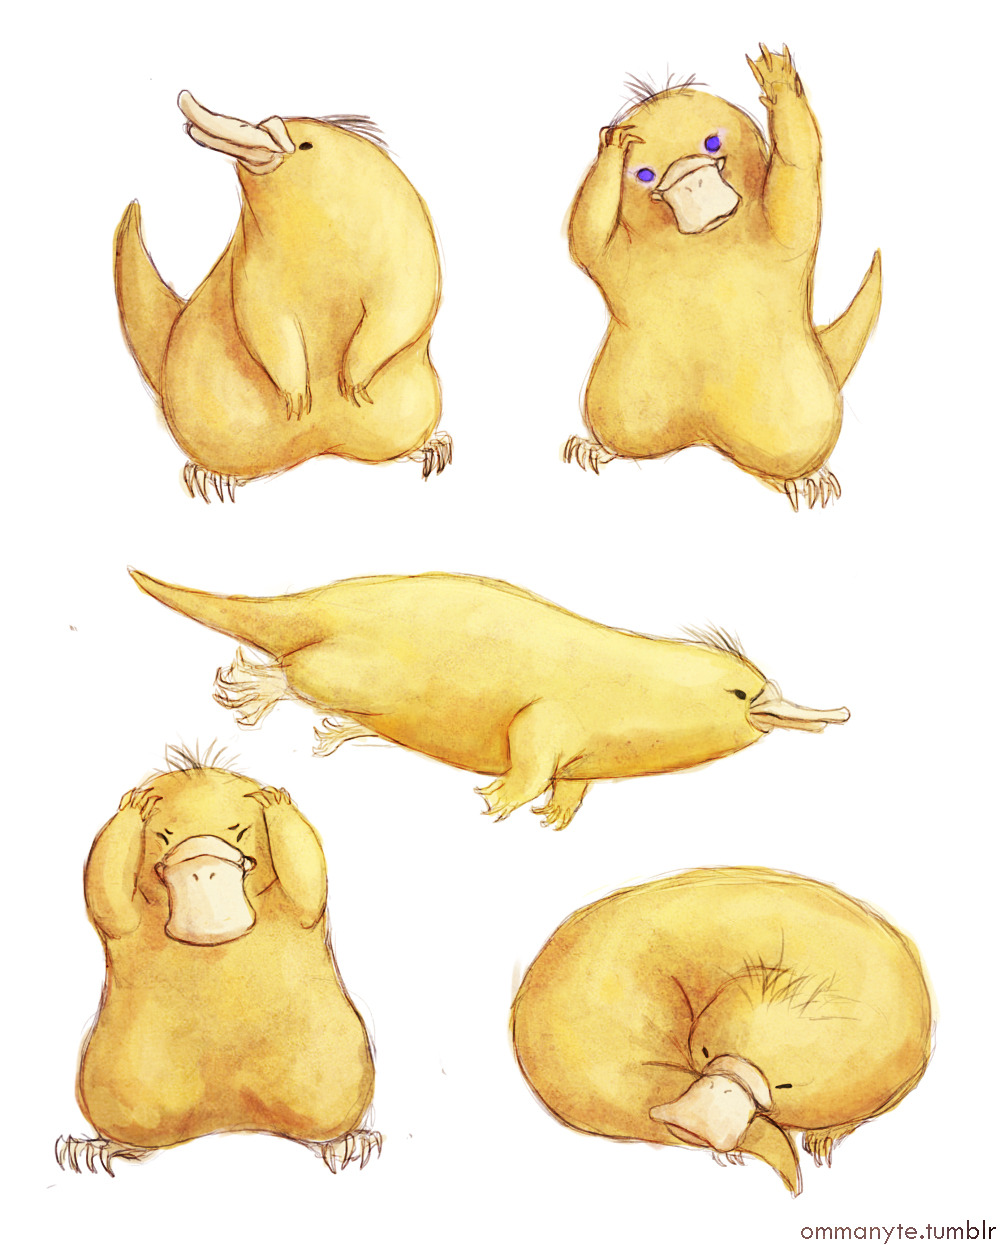 ommanyte:Even from when I was a kid, I always thought psyduck was not a duck per